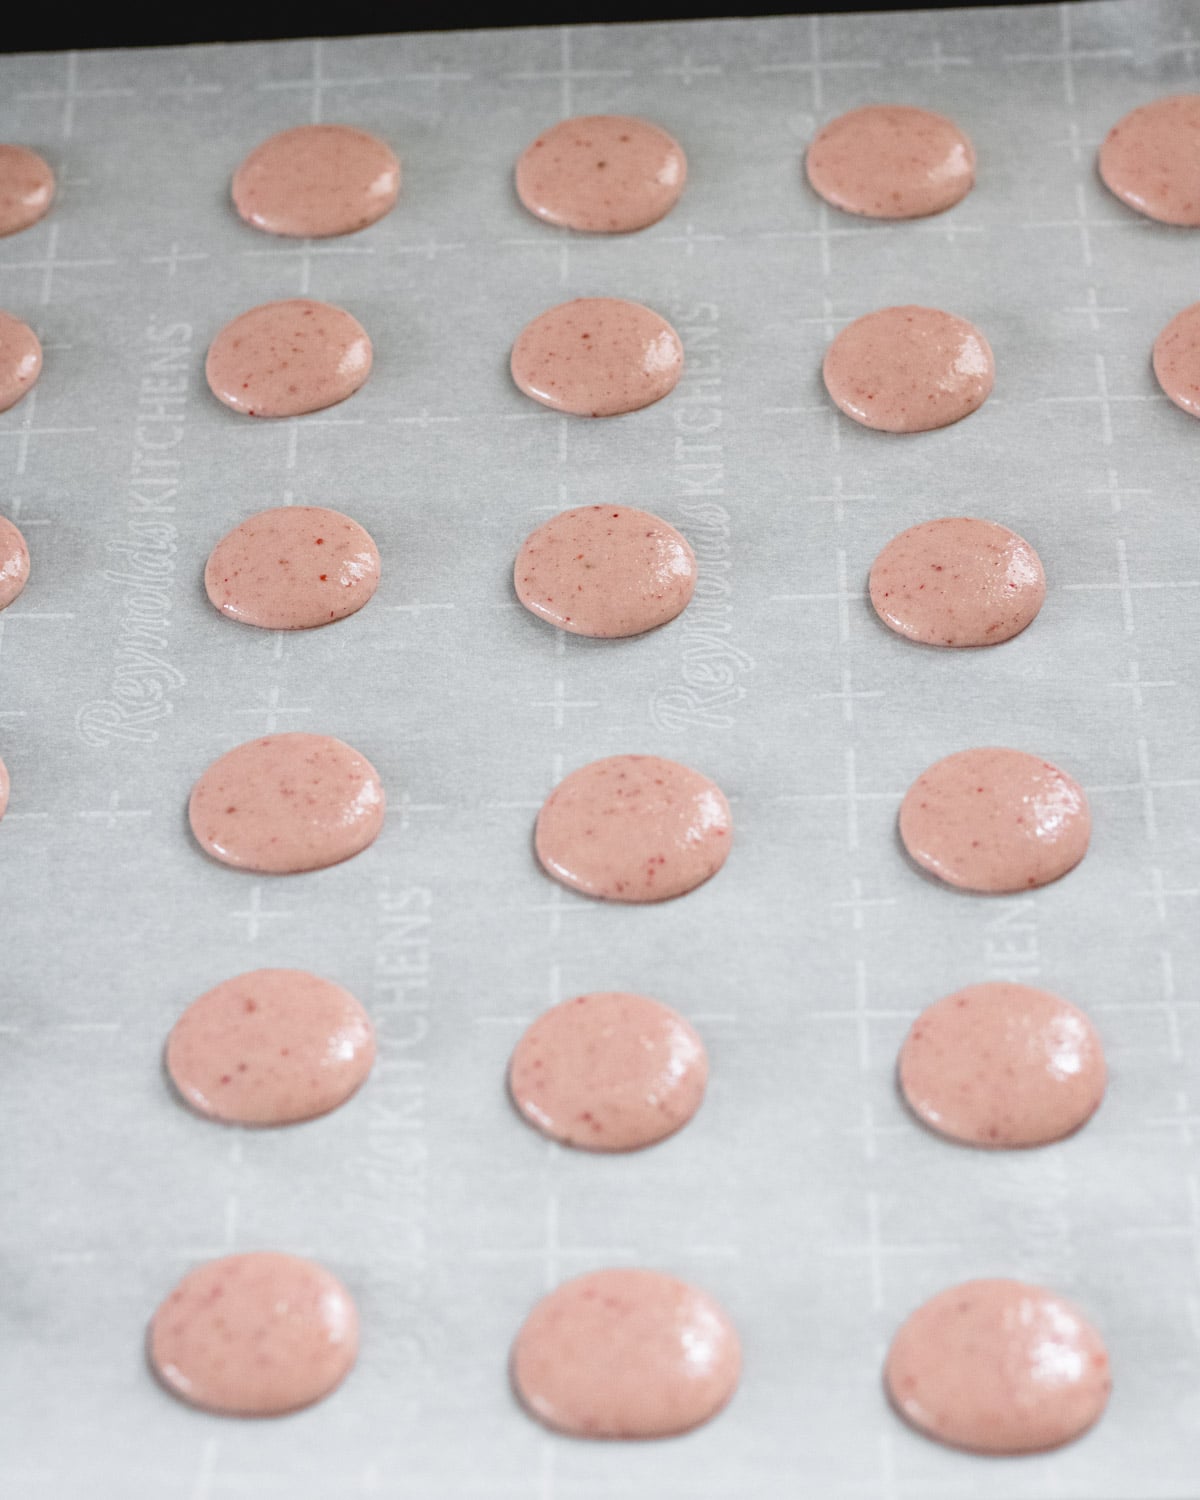 Rows of macaron batter piped in circles onto parchment paper.